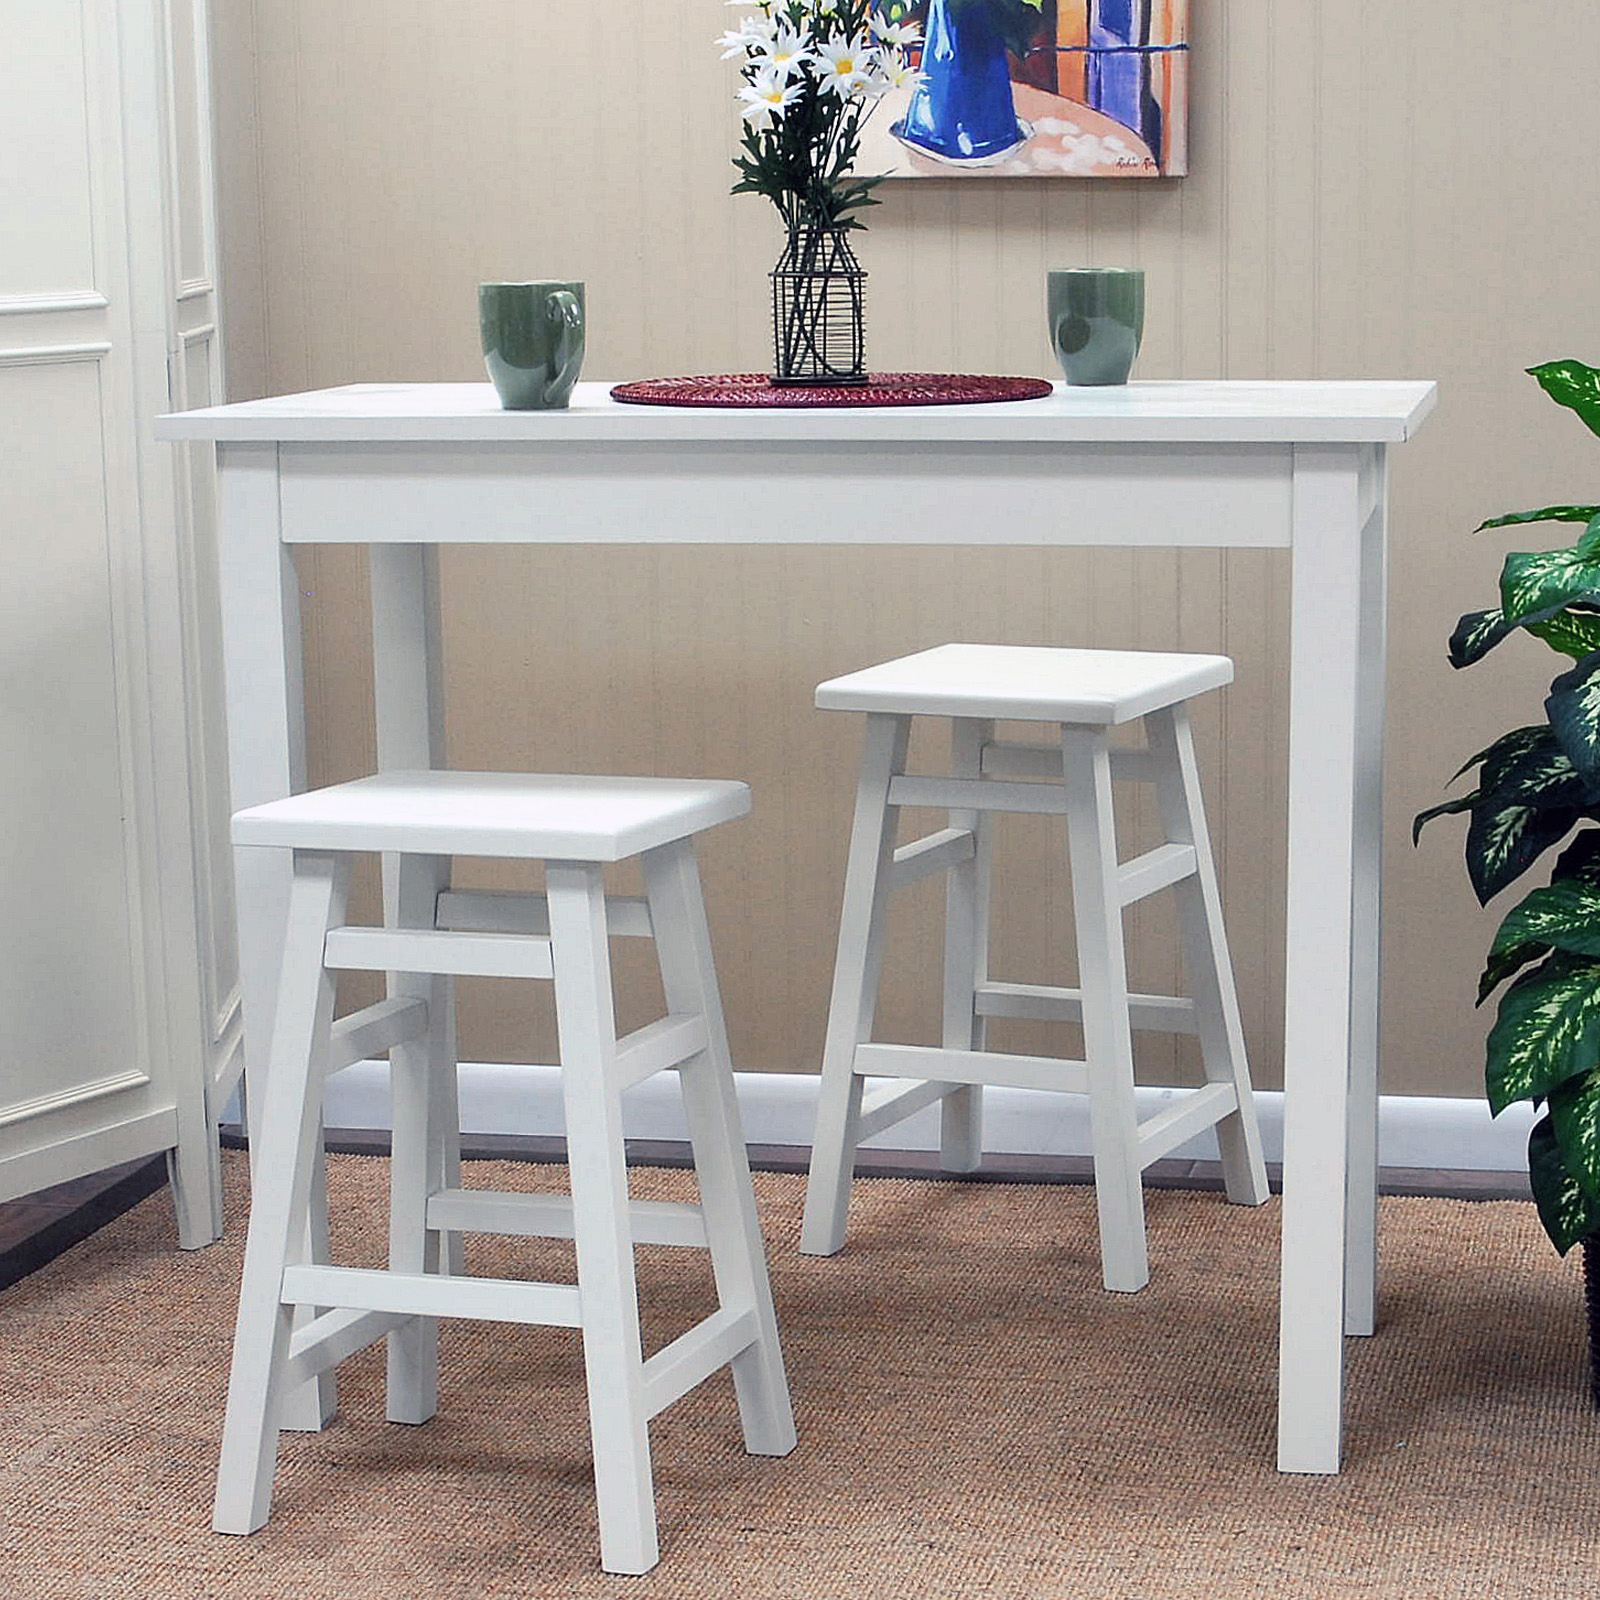 NEW CONTEMPORARY SQUARE ADJUSTABLE BAR STOOL PUB TABLE WHITE  24"-SET OF 4 